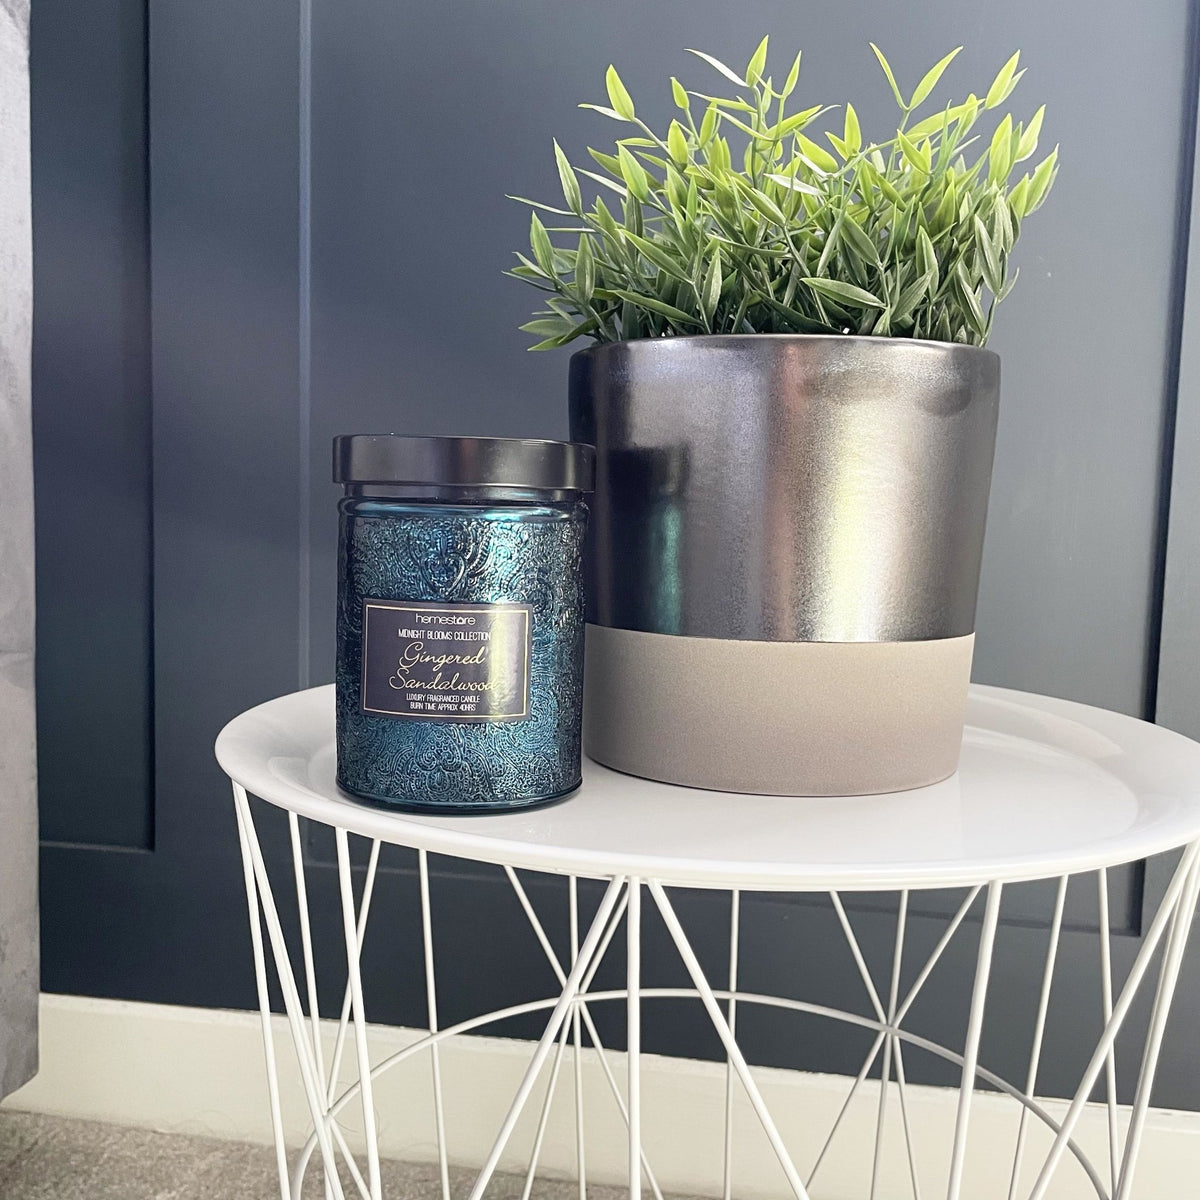 Terra Grey Metallic Style Planters with greenery in and candle, on white table against blue wall